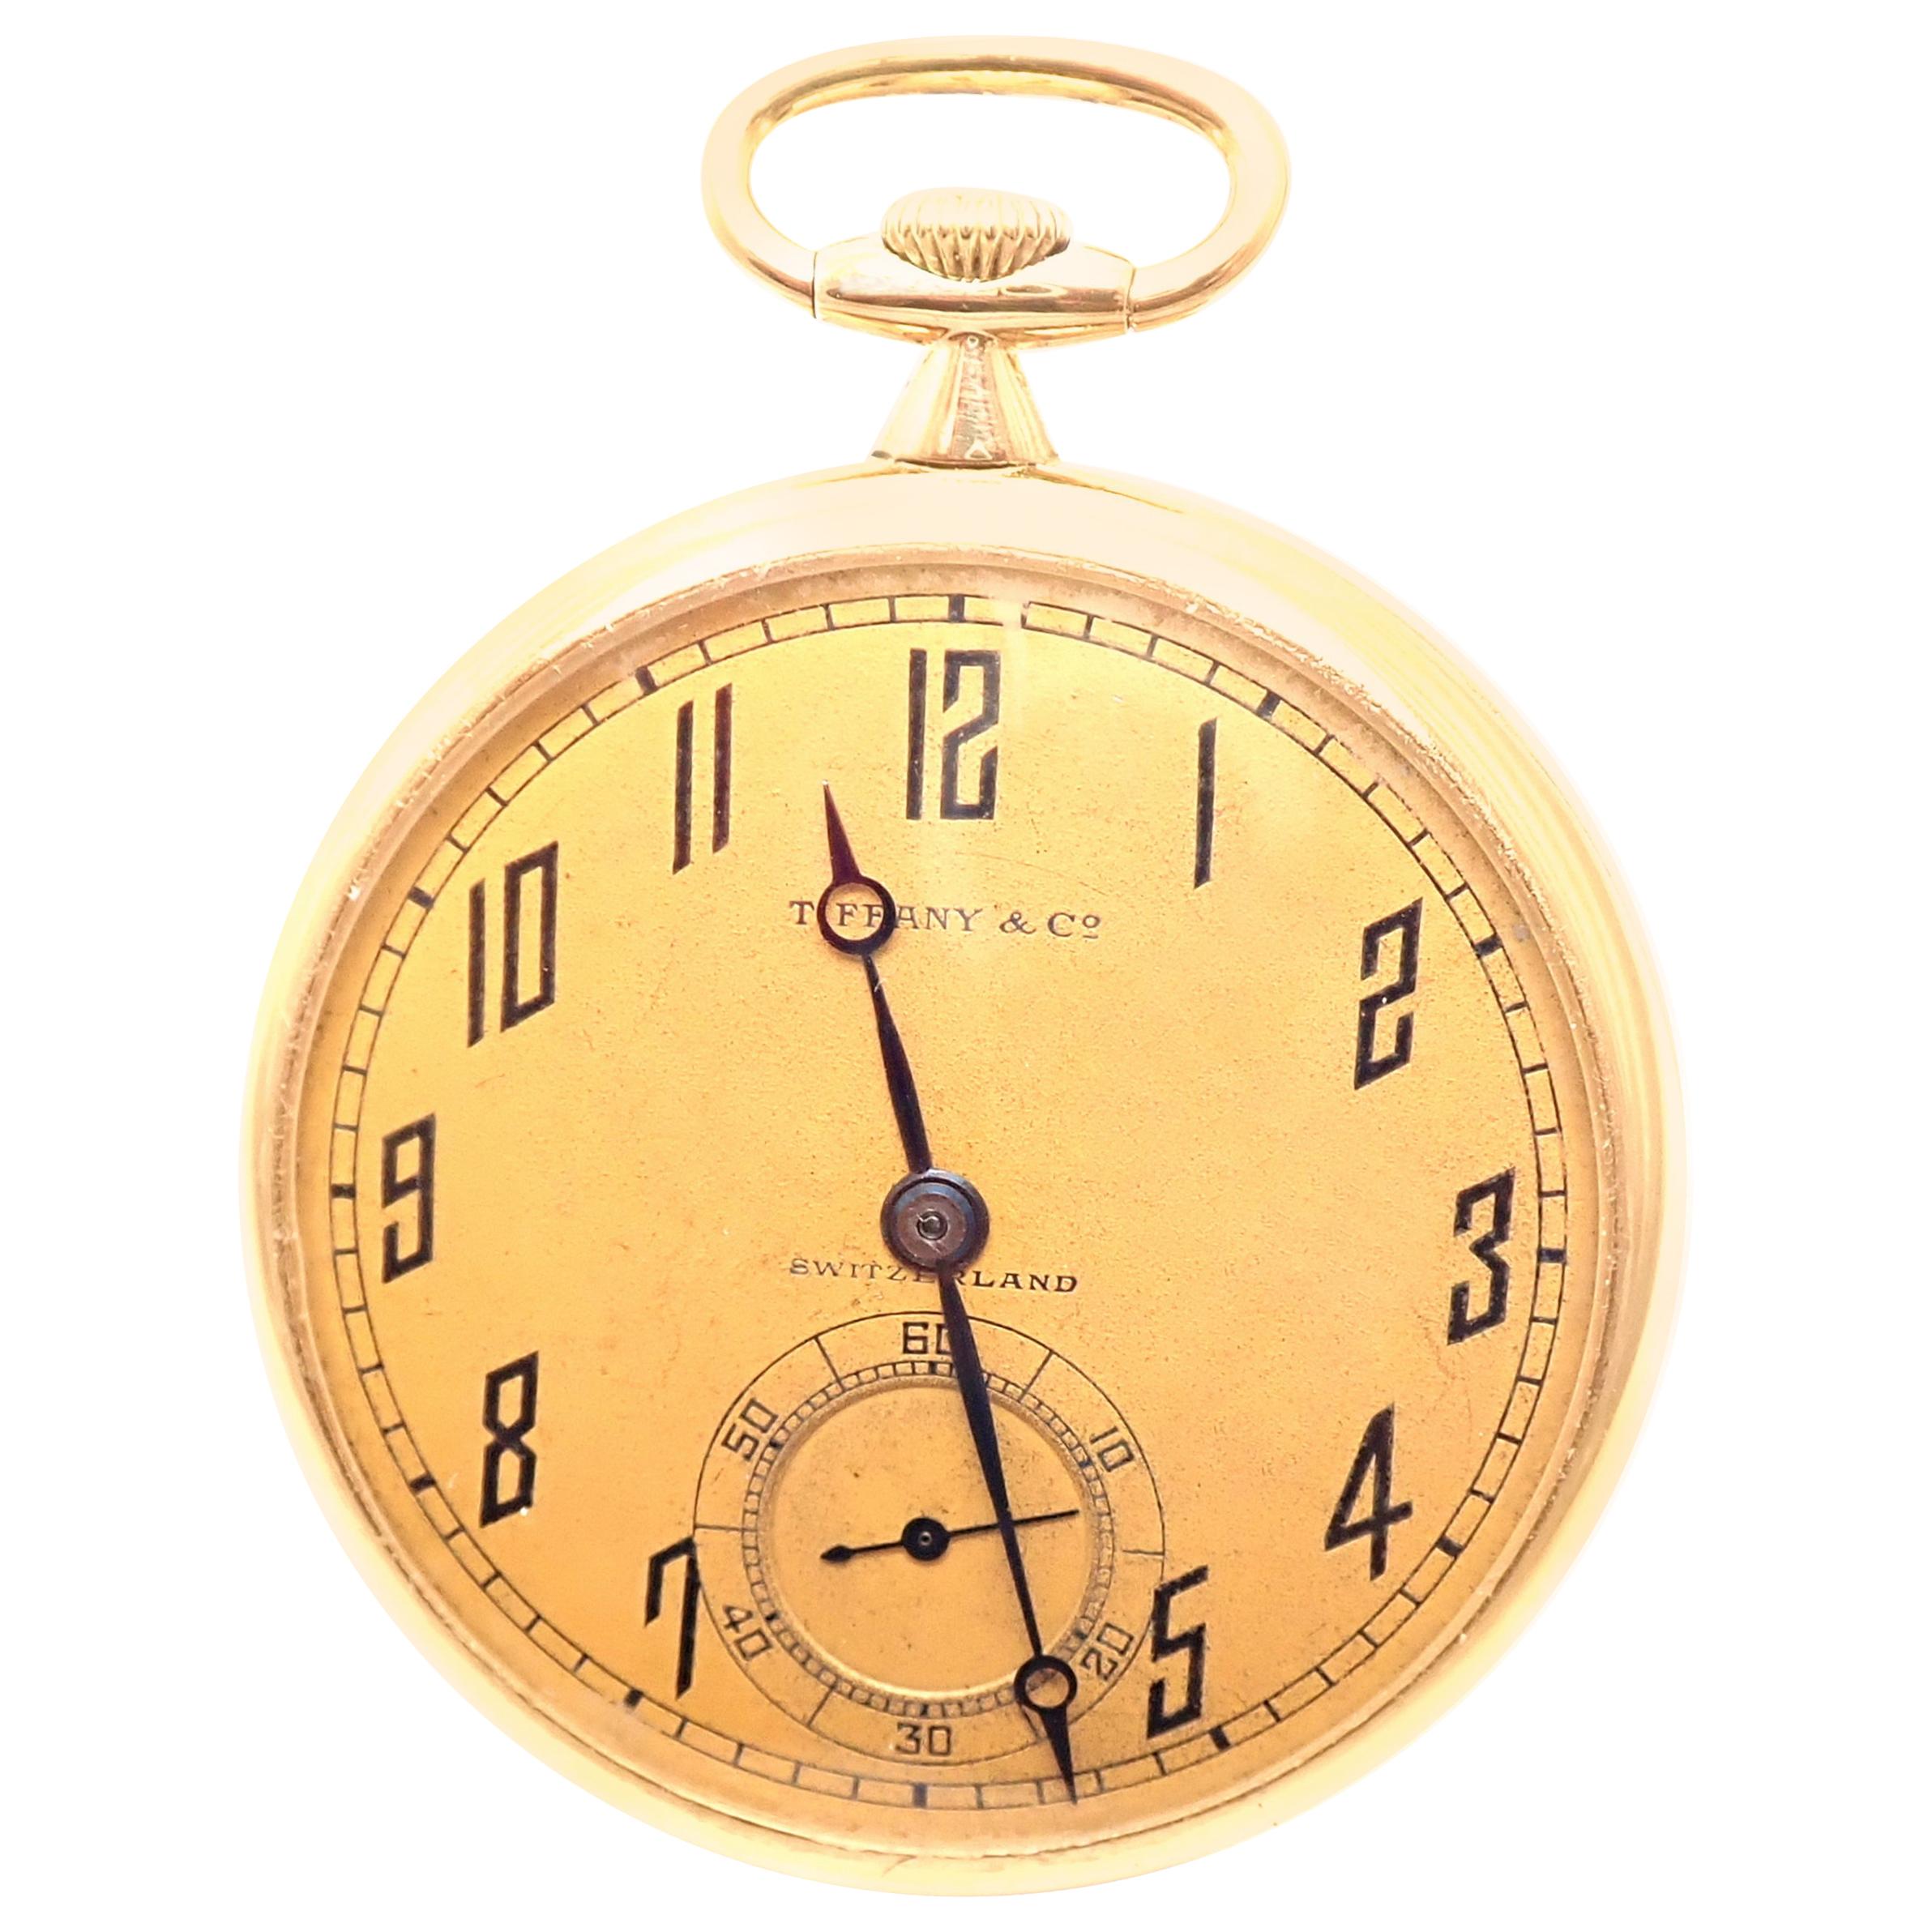 Vintage Agassiz W & Co Made for Tiffany & Co Yellow Gold Pocket Watch